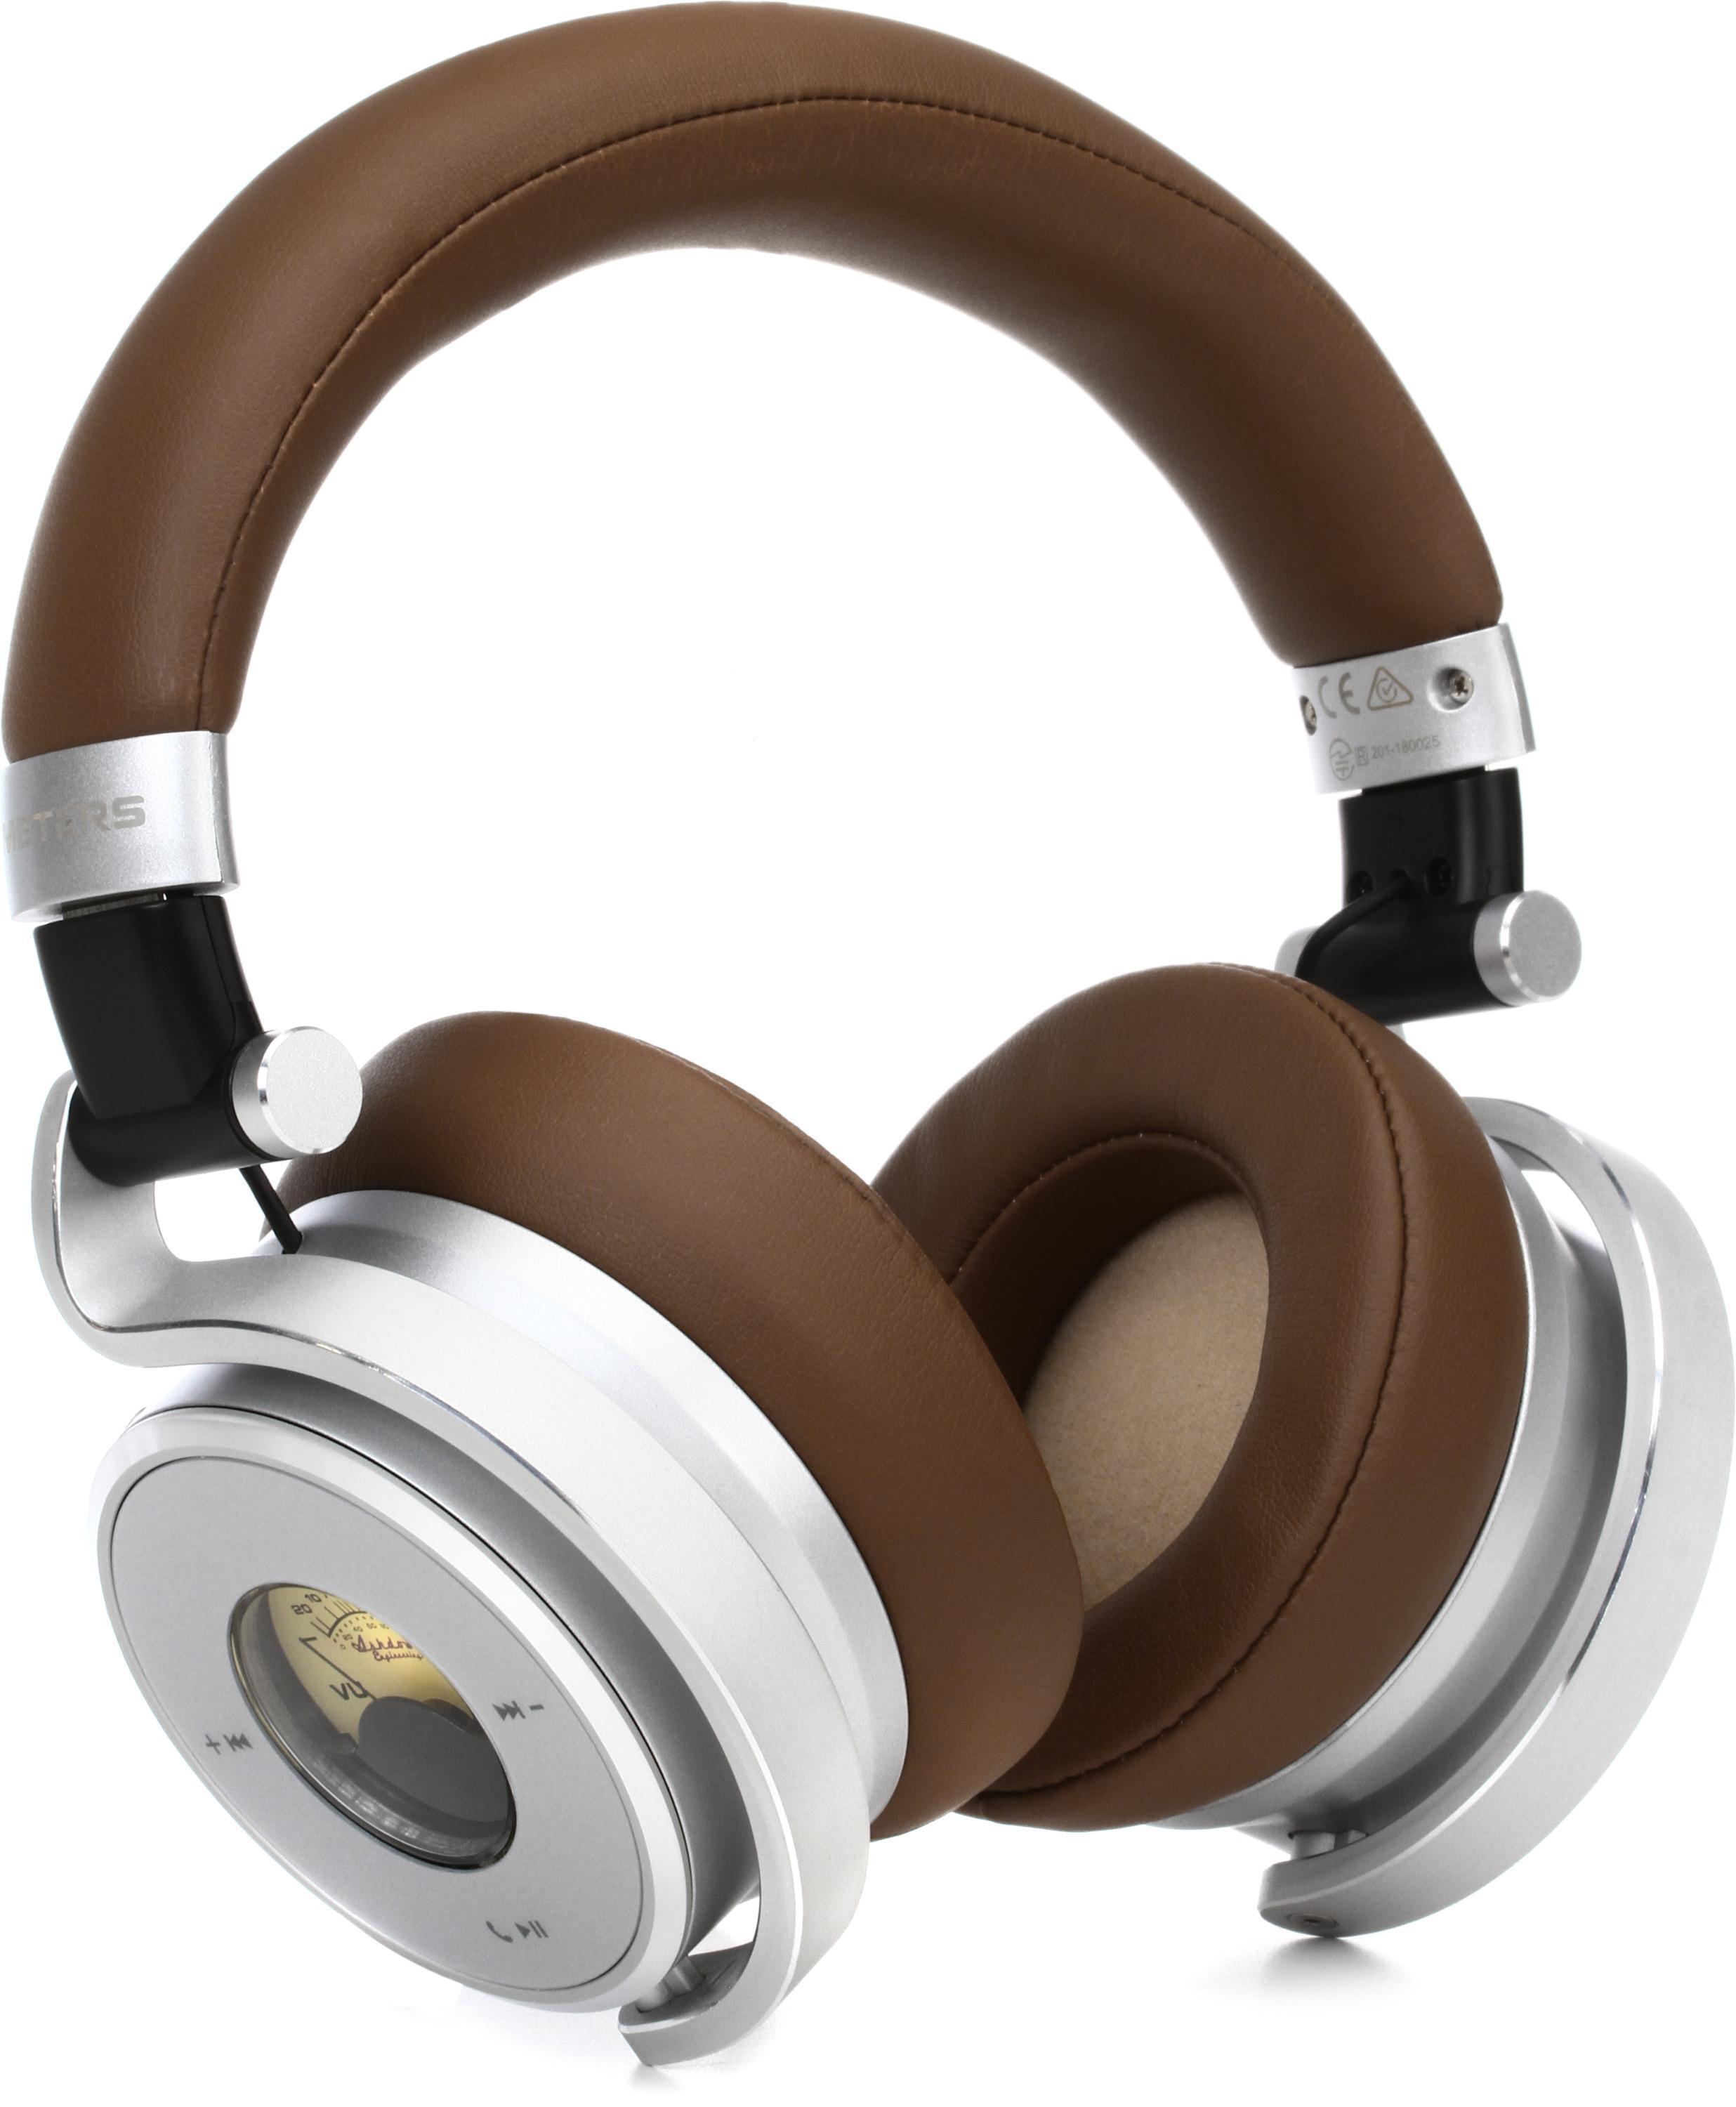 Meters OV-1-B-Connect Over-ear Active Noise Canceling Bluetooth Headphones  - Tan